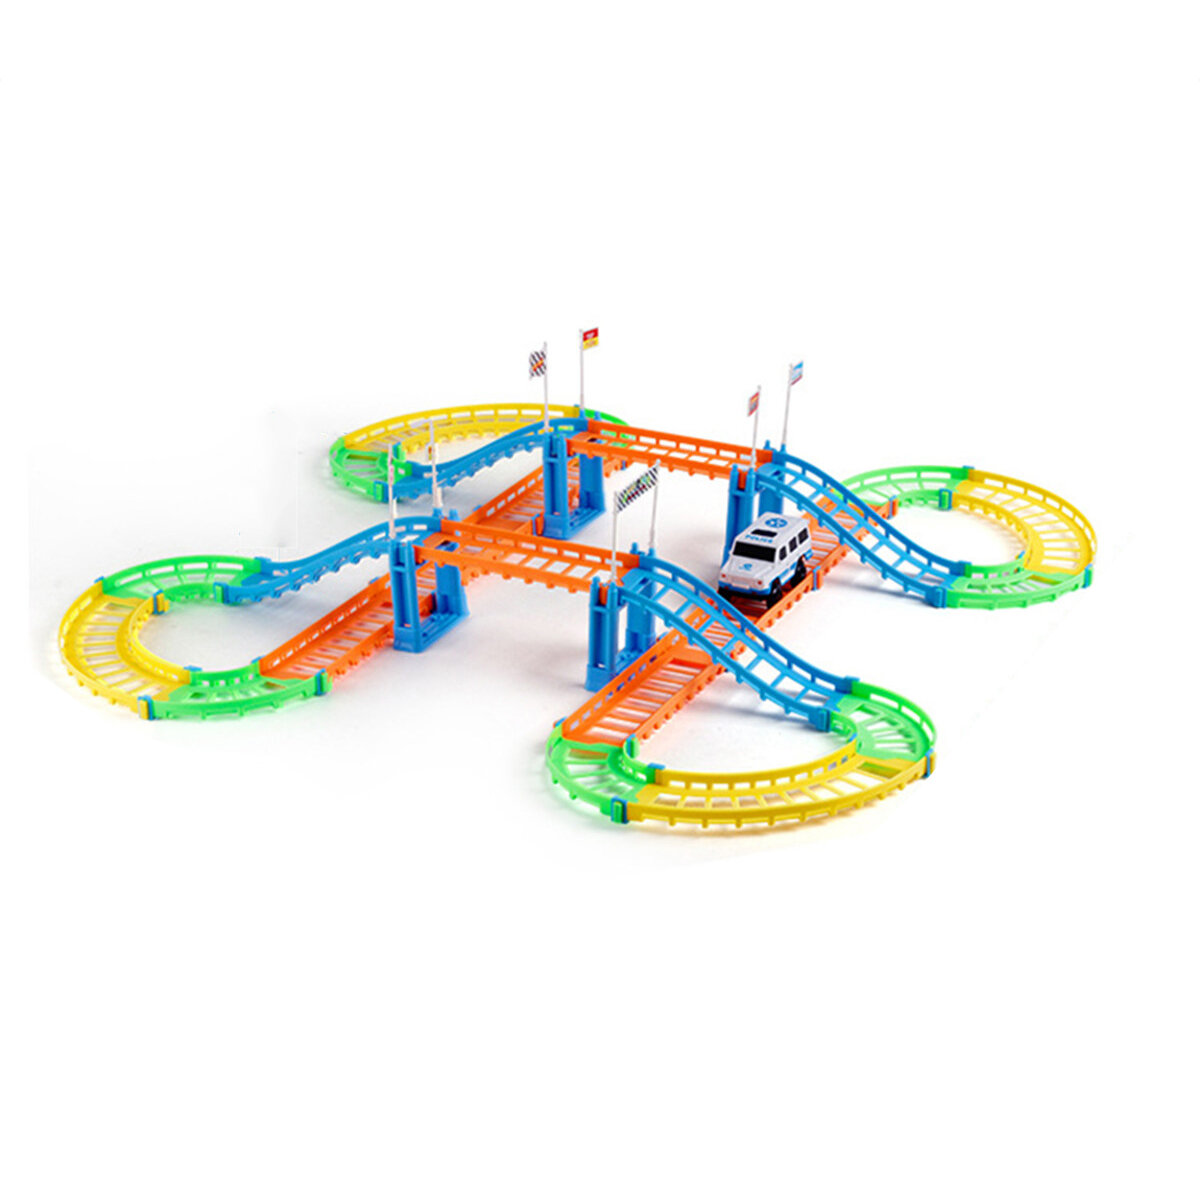 

88pcs Track Racing Car Toy Children's Electric Rail Car Toy Set Double Track Assembly Combination Puzzle Toy Kids Gift